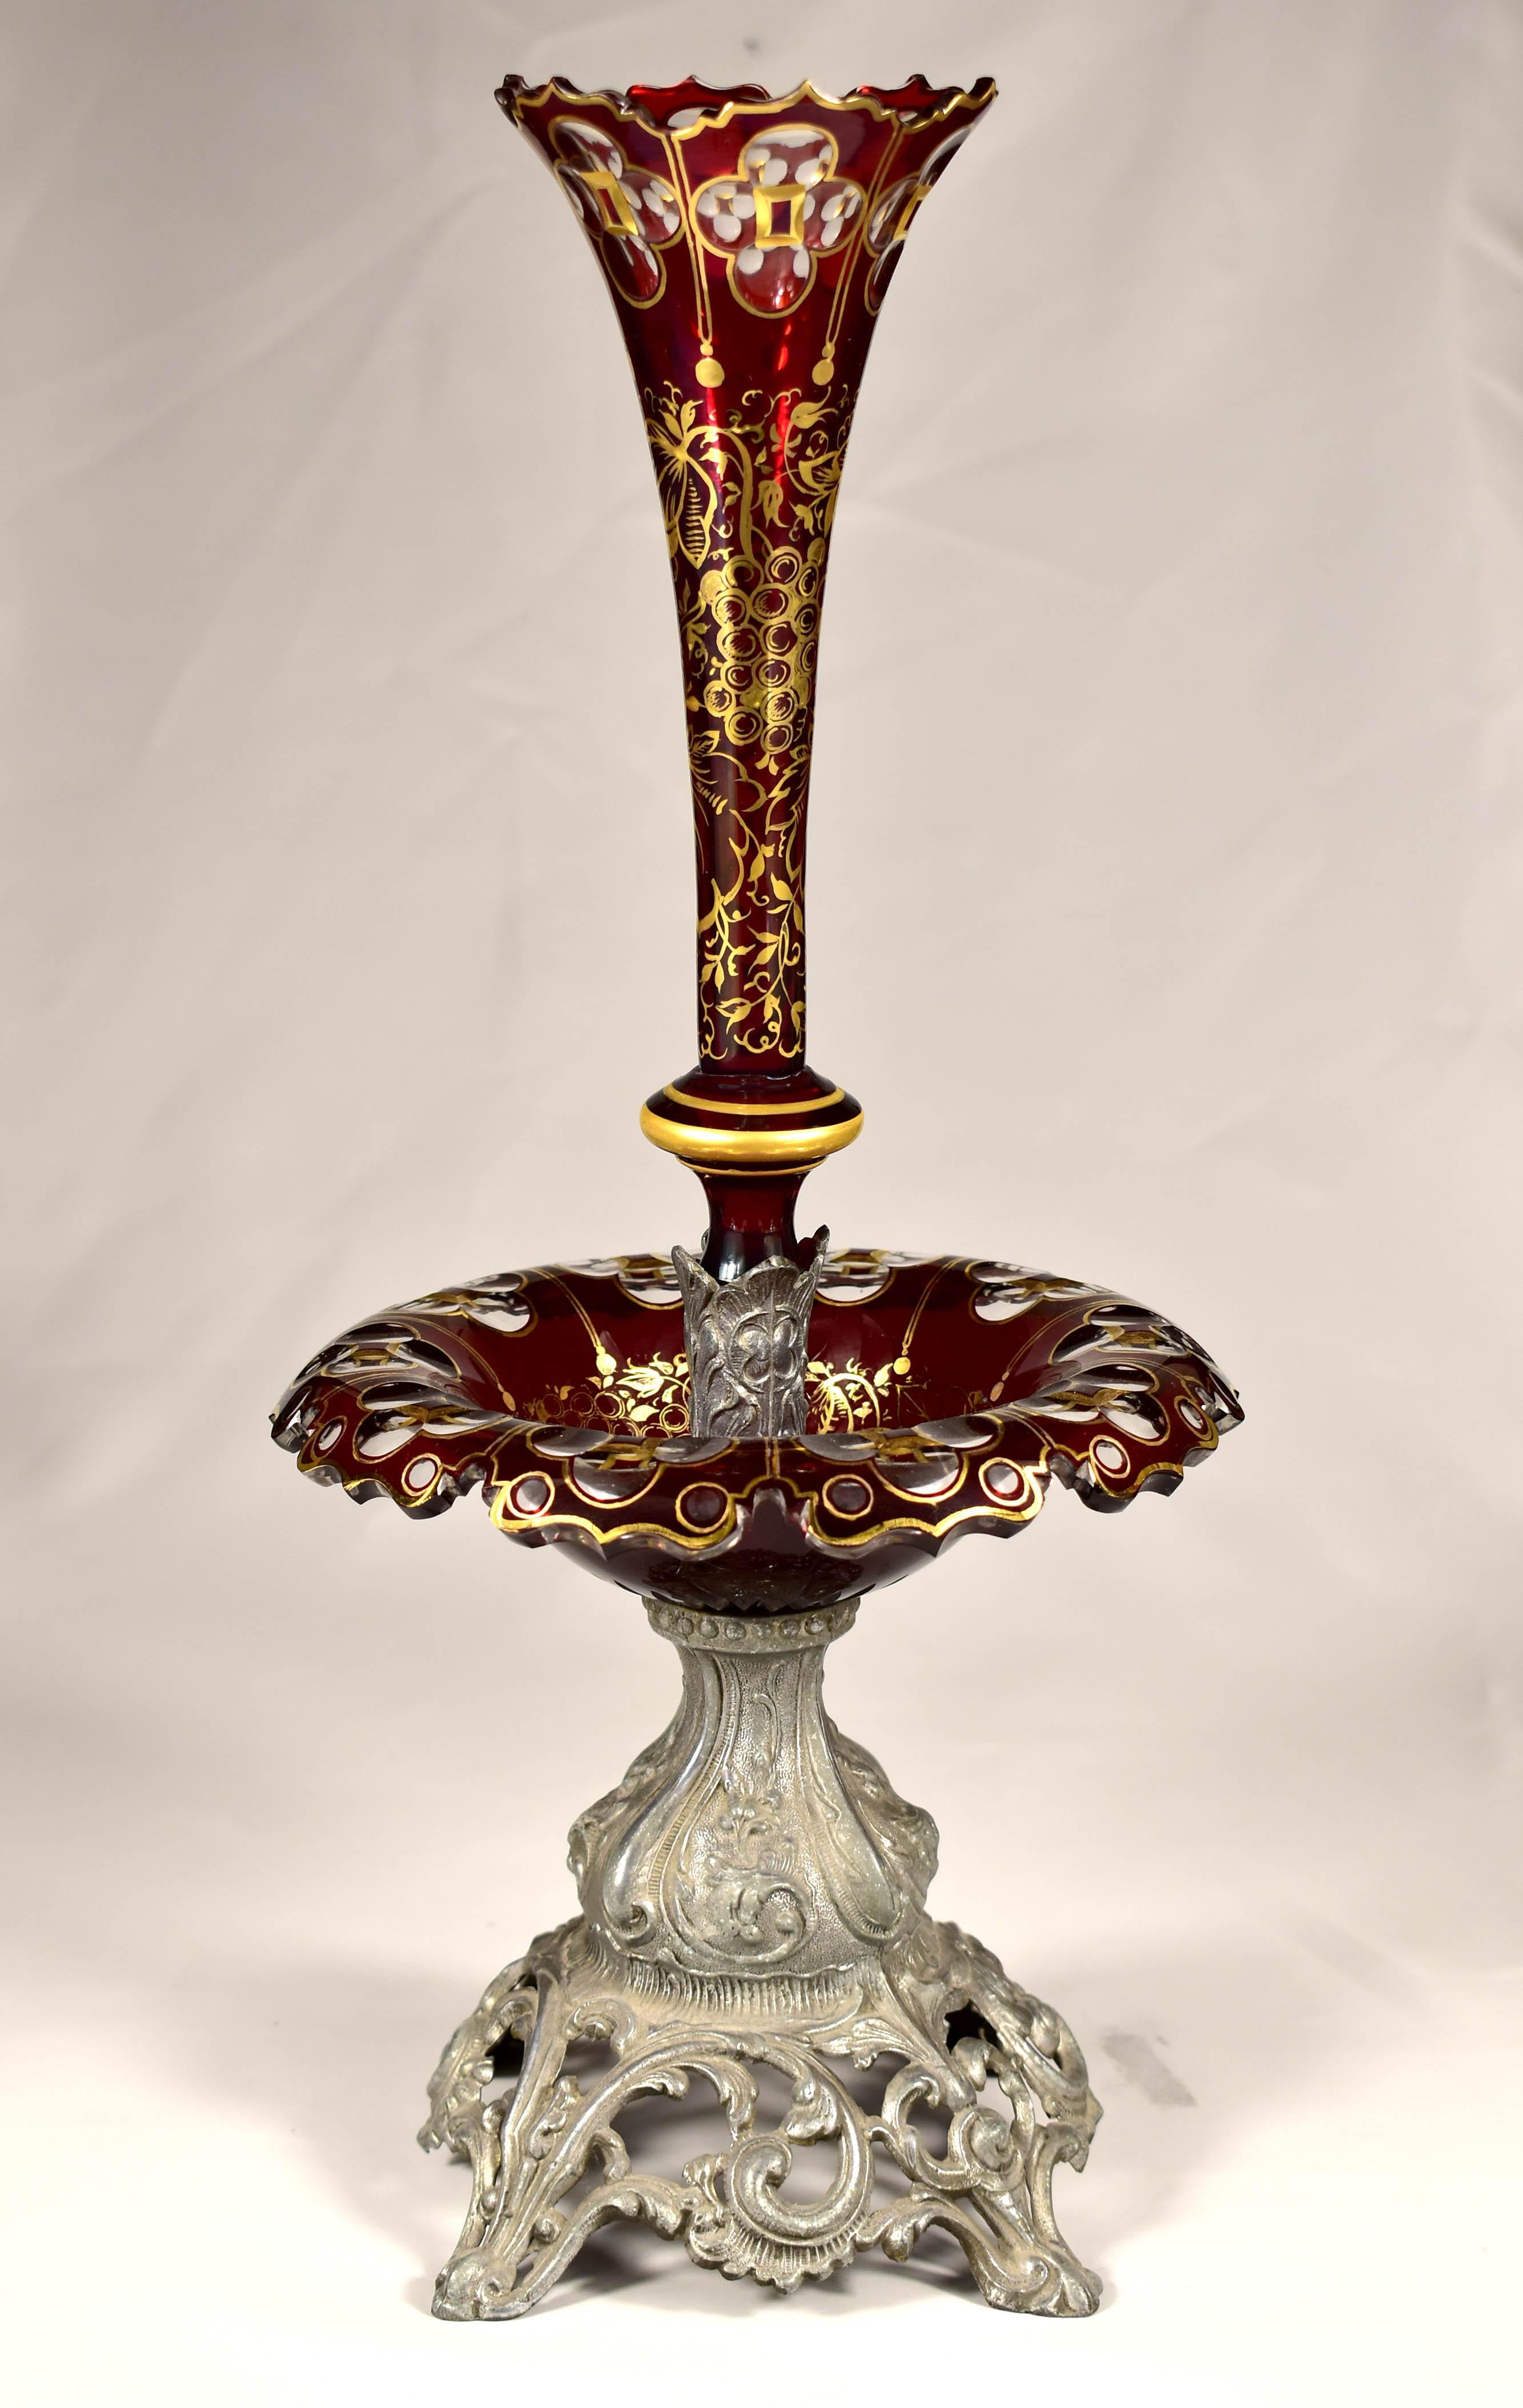 The body of the bowl was made of tin alloy. A wide glass bowl or plate was used to display fruit or other goodies. The top glass in the shape of a tall, narrow flower serves as a vase. Both glass pieces have cut edges. The glass parts are made of